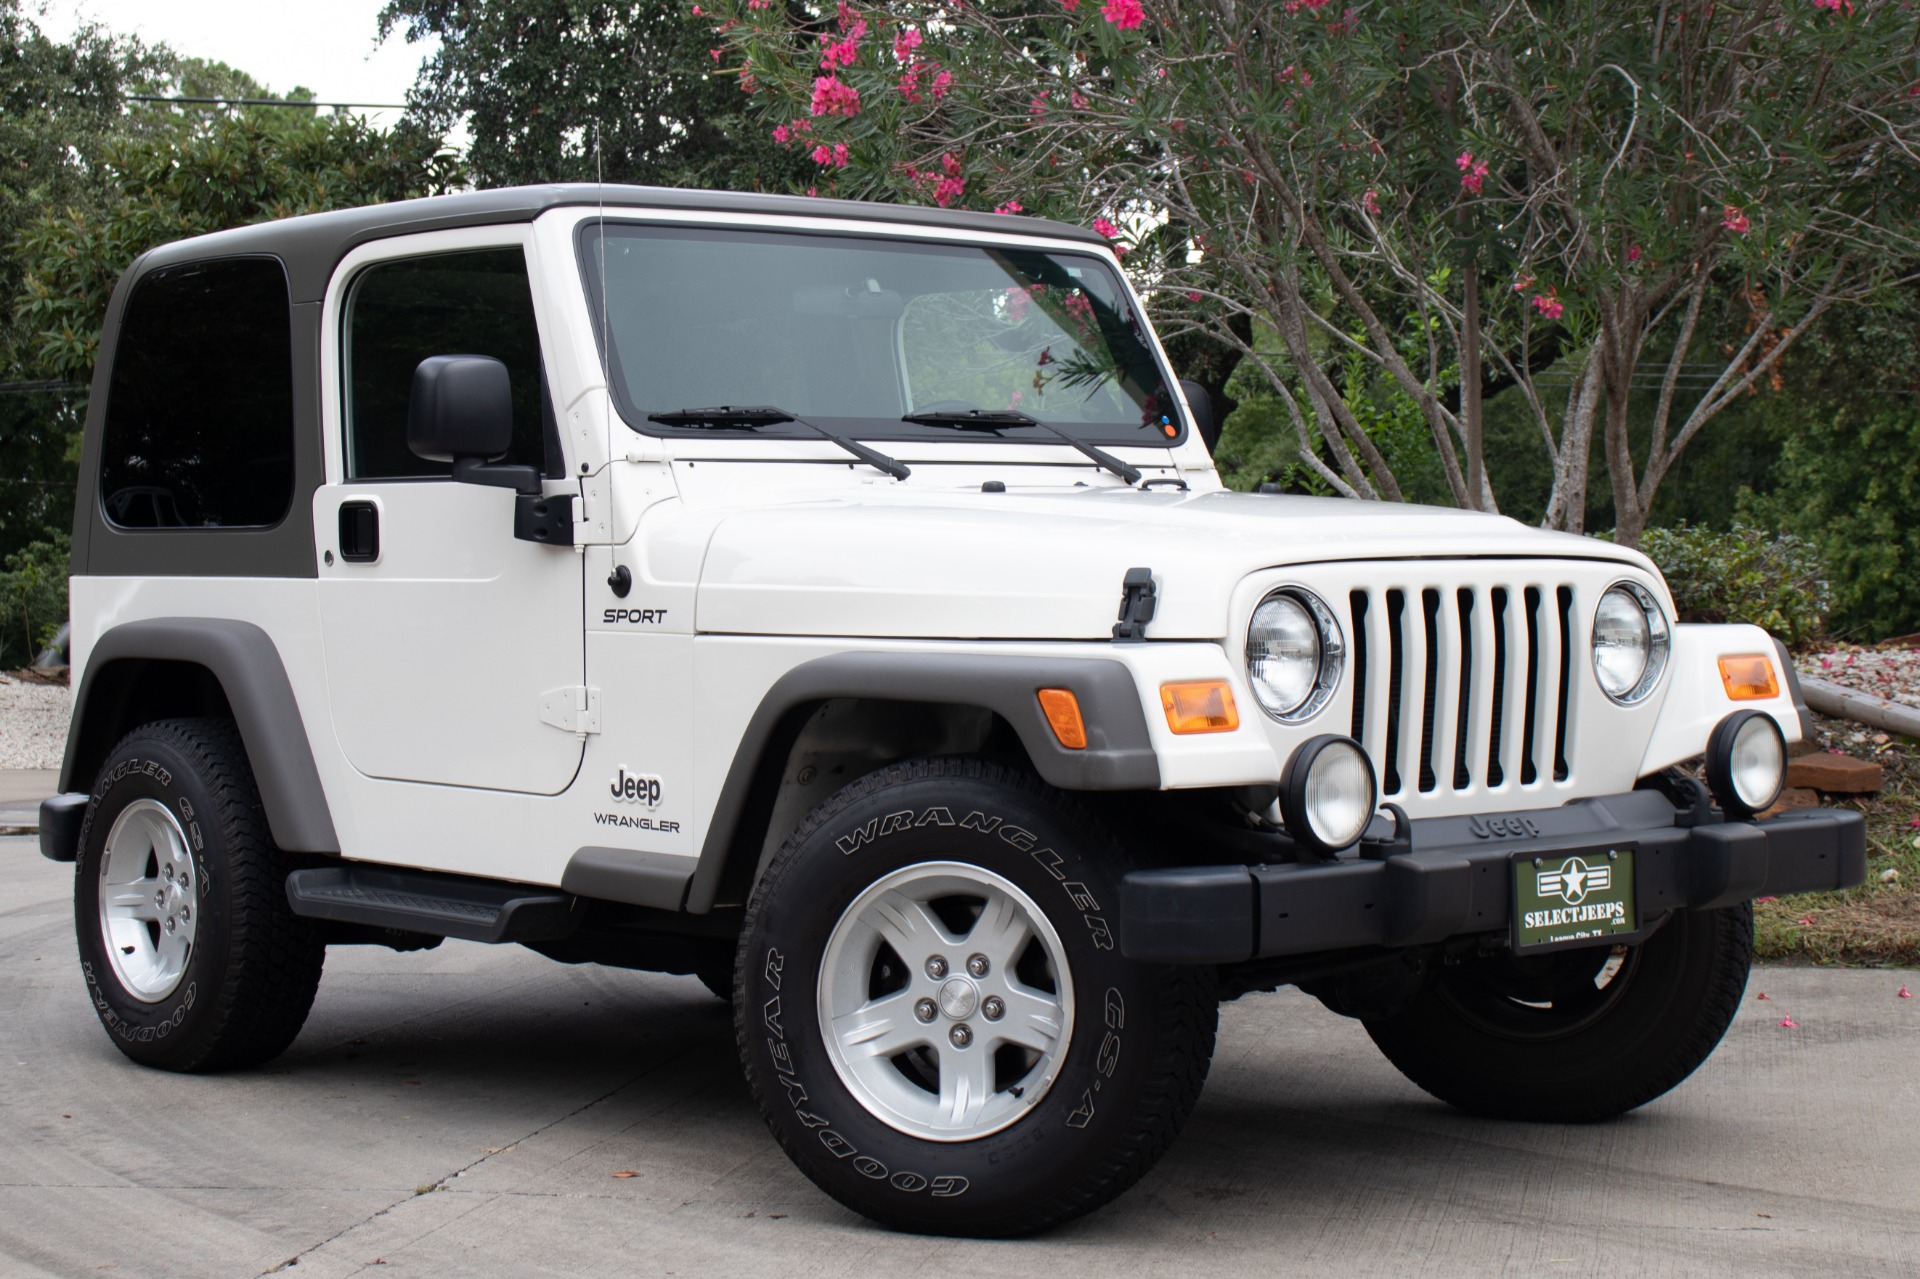 Used 2005 Jeep Wrangler 2dr Sport For Sale ($26,995) | Select Jeeps Inc.  Stock #330717